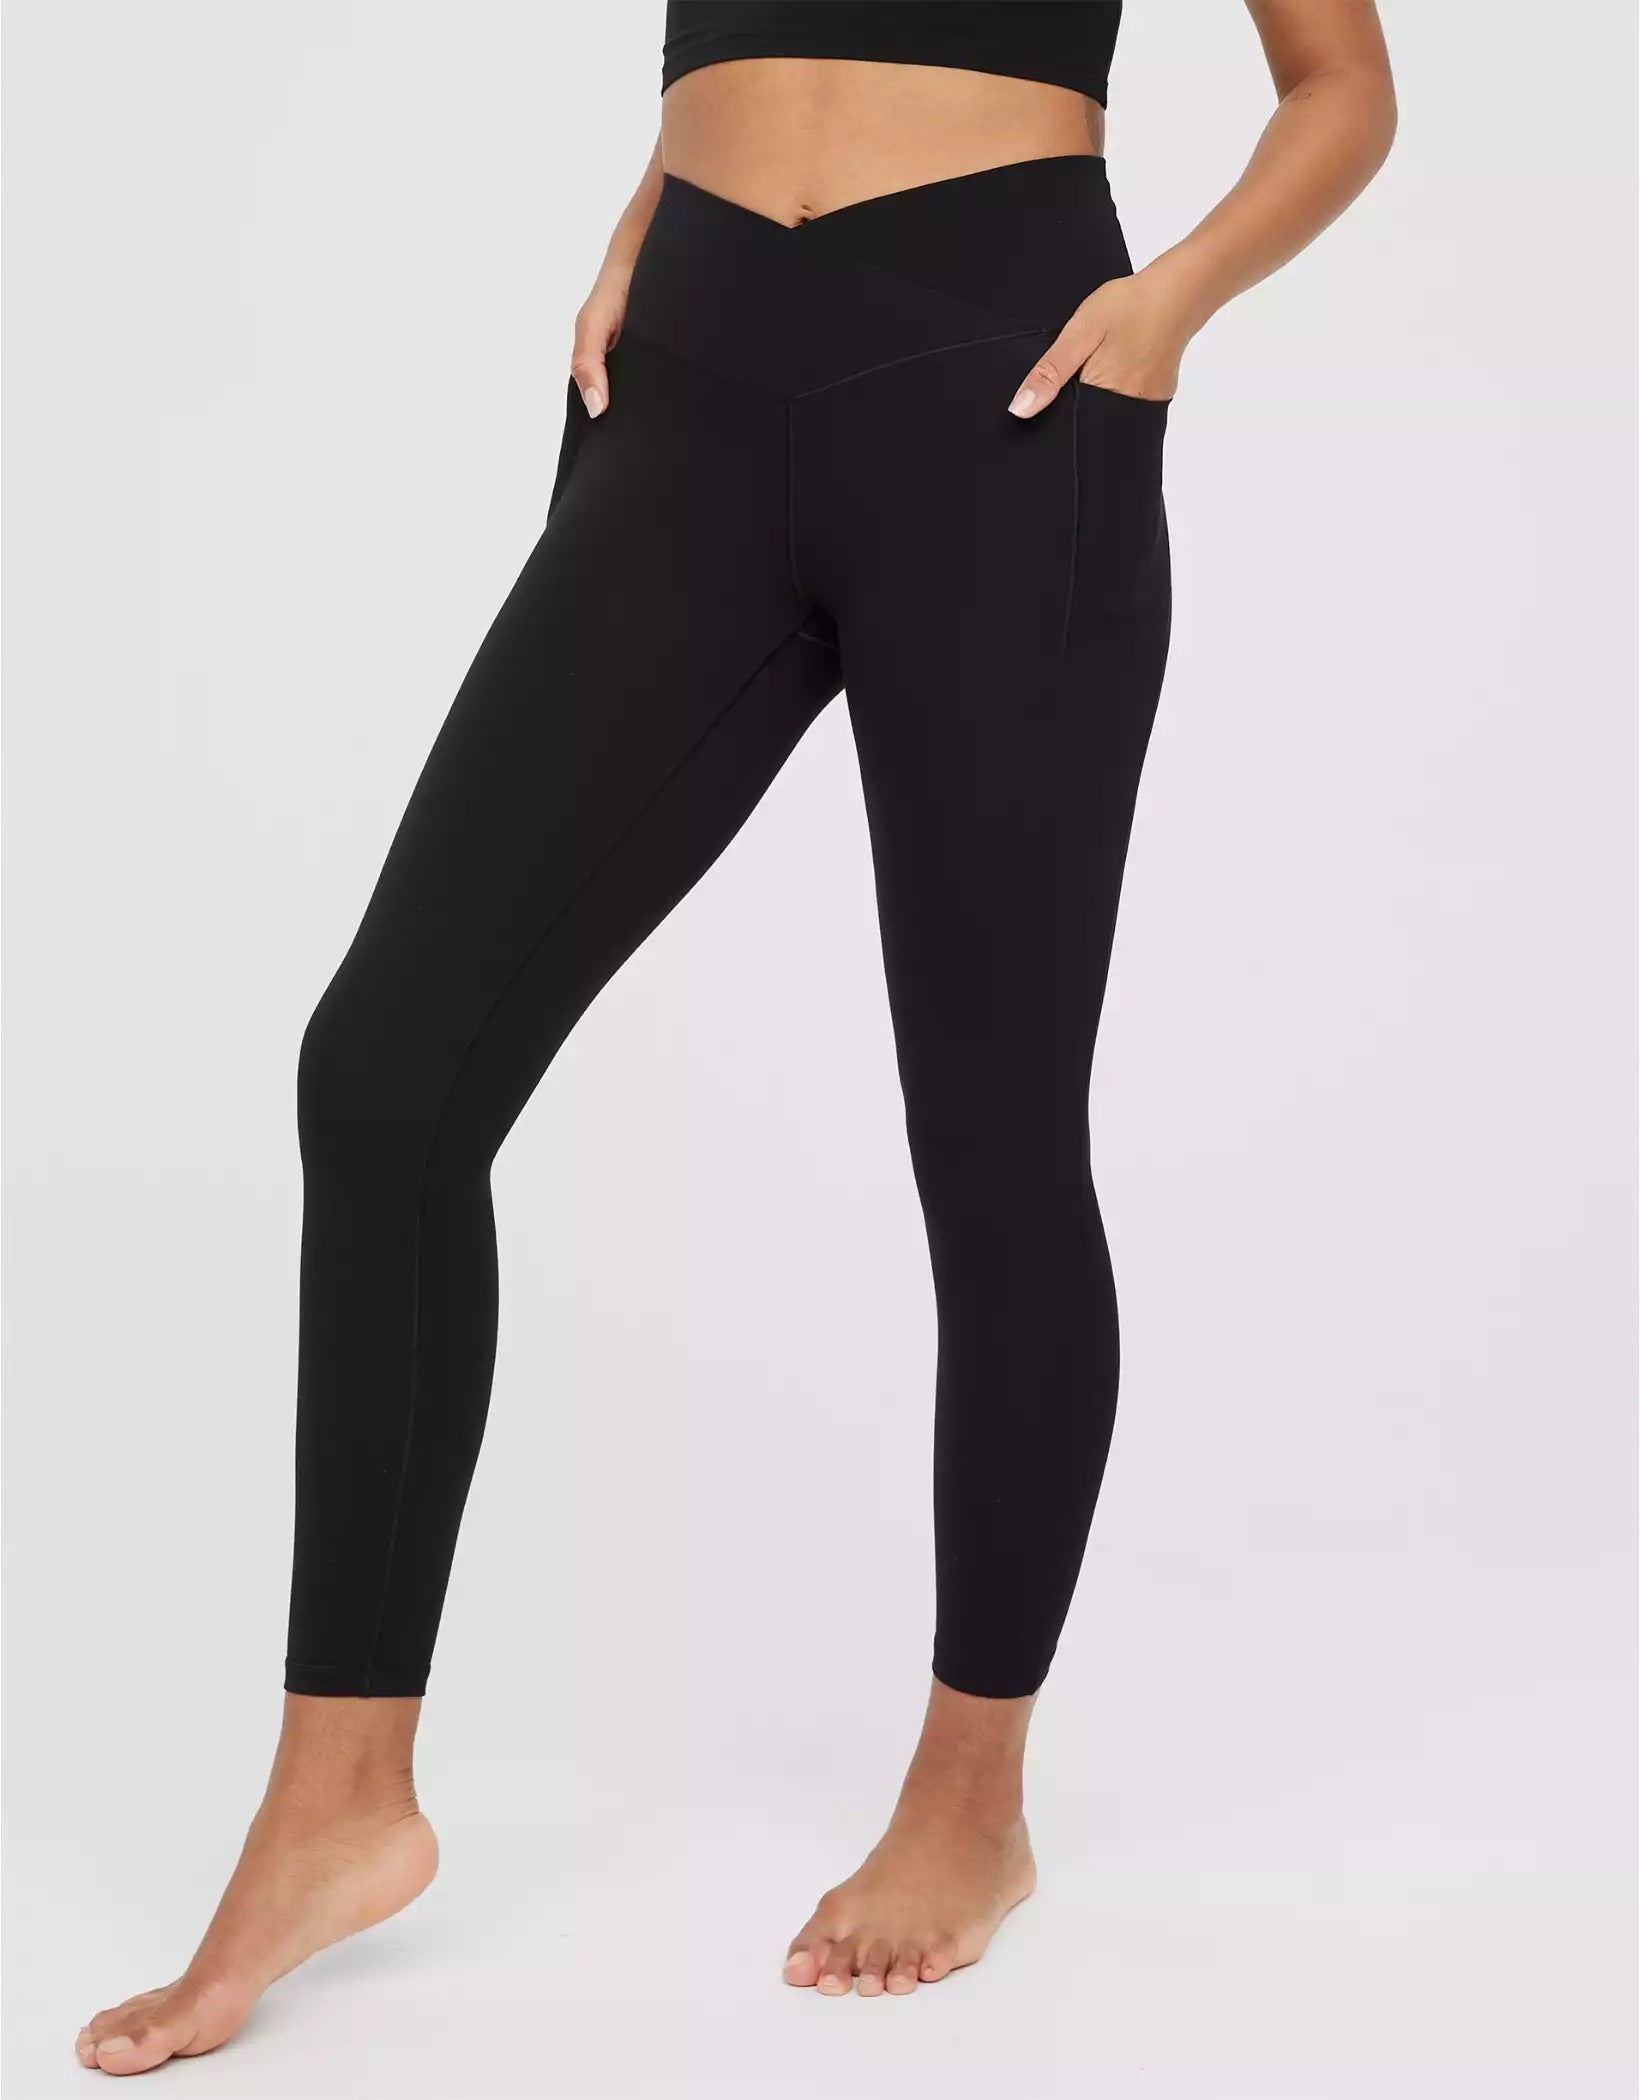 cirea Plus Size Leggings for Women - Workout and Yoga Pants in Comfortable  and Stylish (Small,Black) at  Women's Clothing store